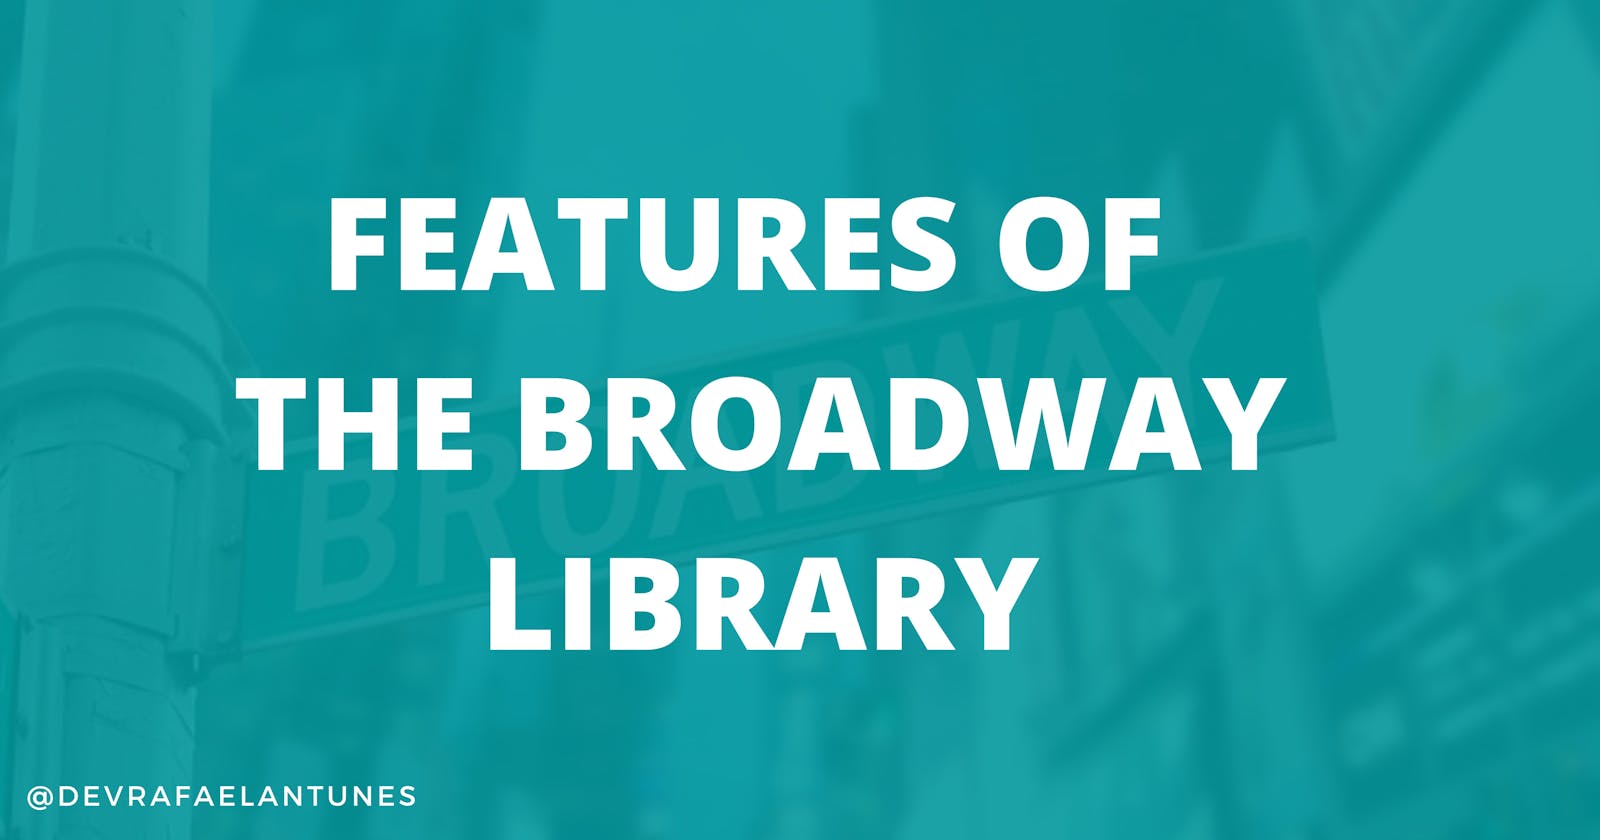 Features of the Broadway Library